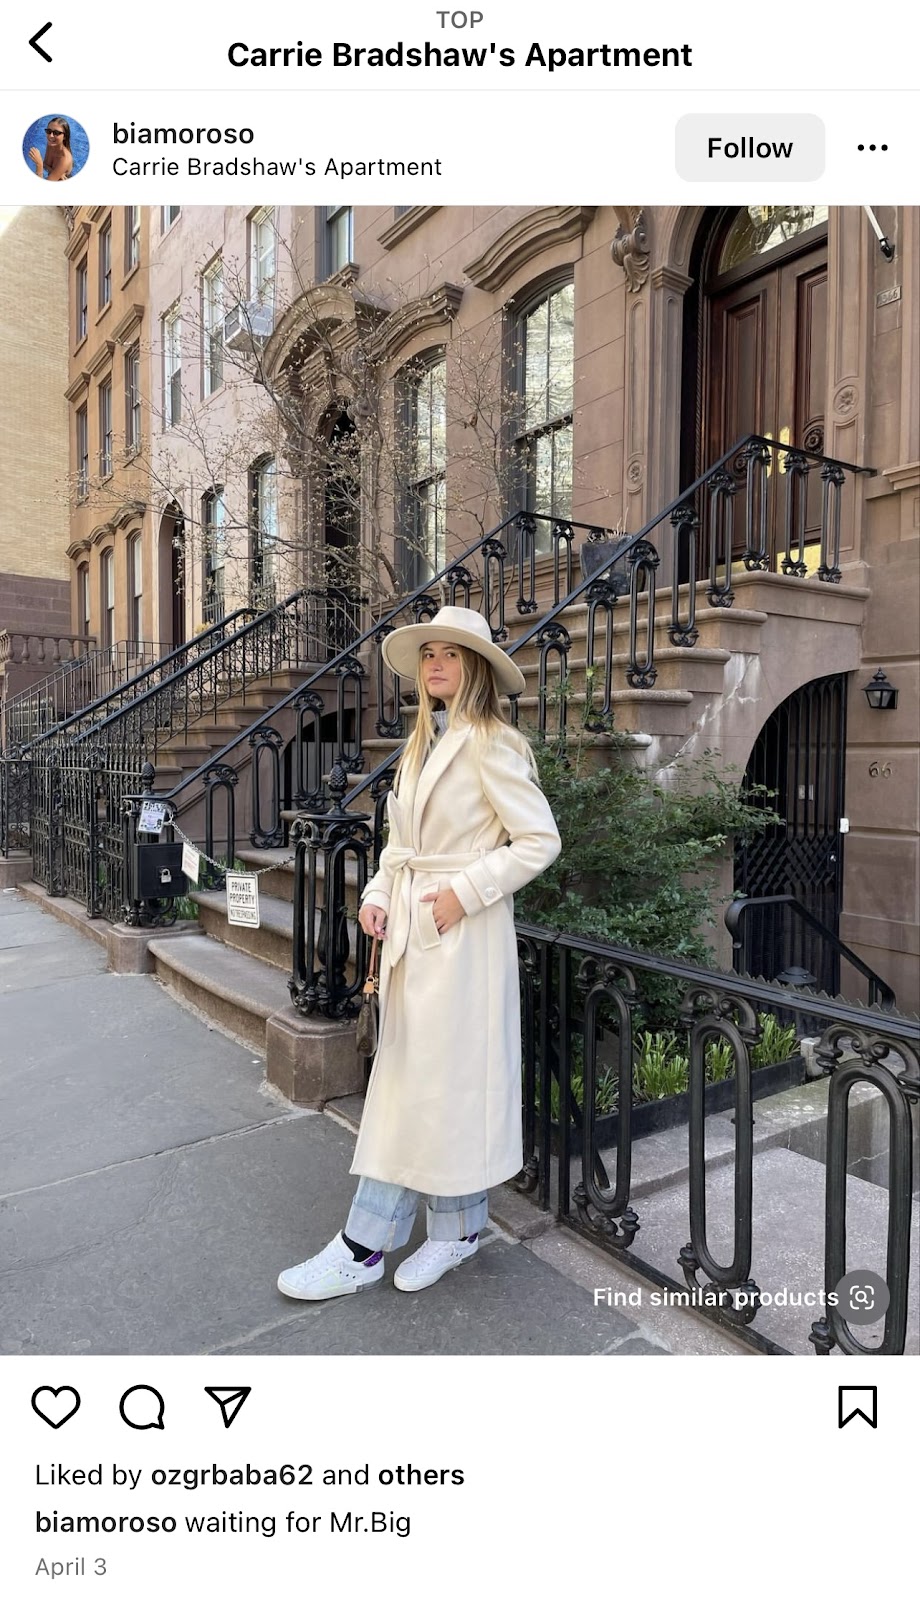 instagram photo with carrie bradshaw's apartment as location